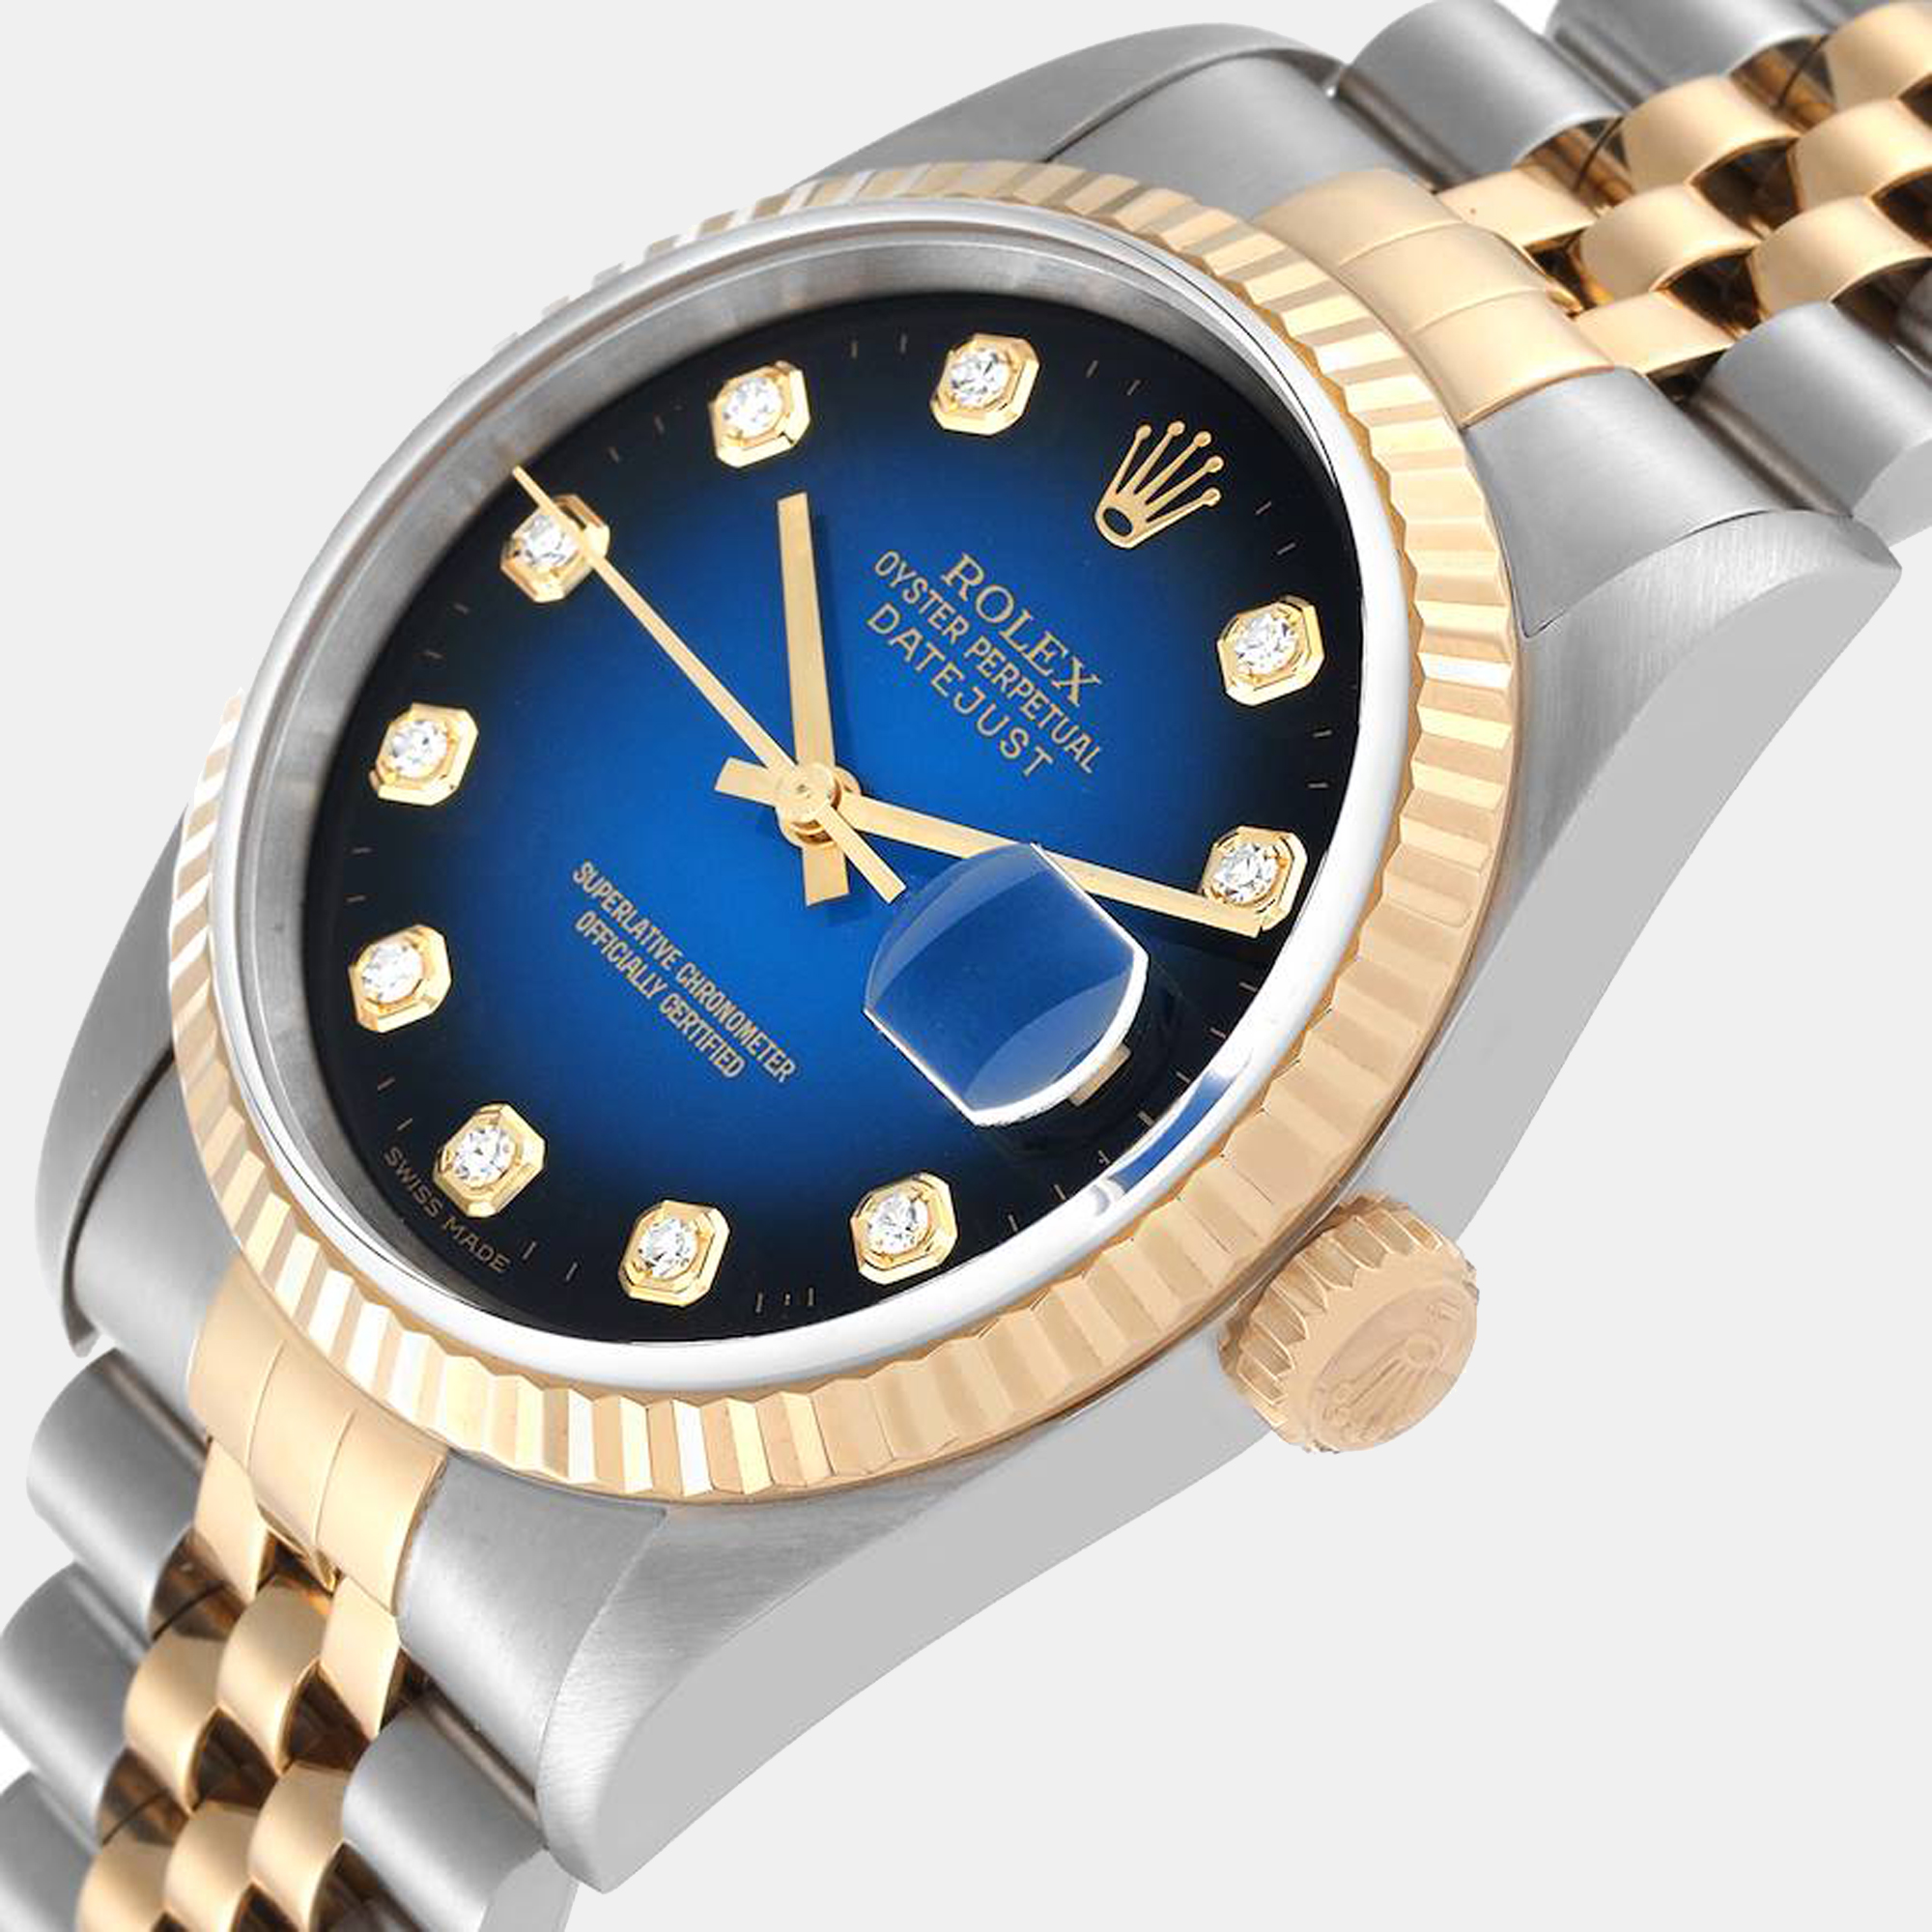 

Rolex Blue Diamonds 18K Yellow Gold And Stainless Steel Datejust 16233 Men's Wristwatch 36 mm